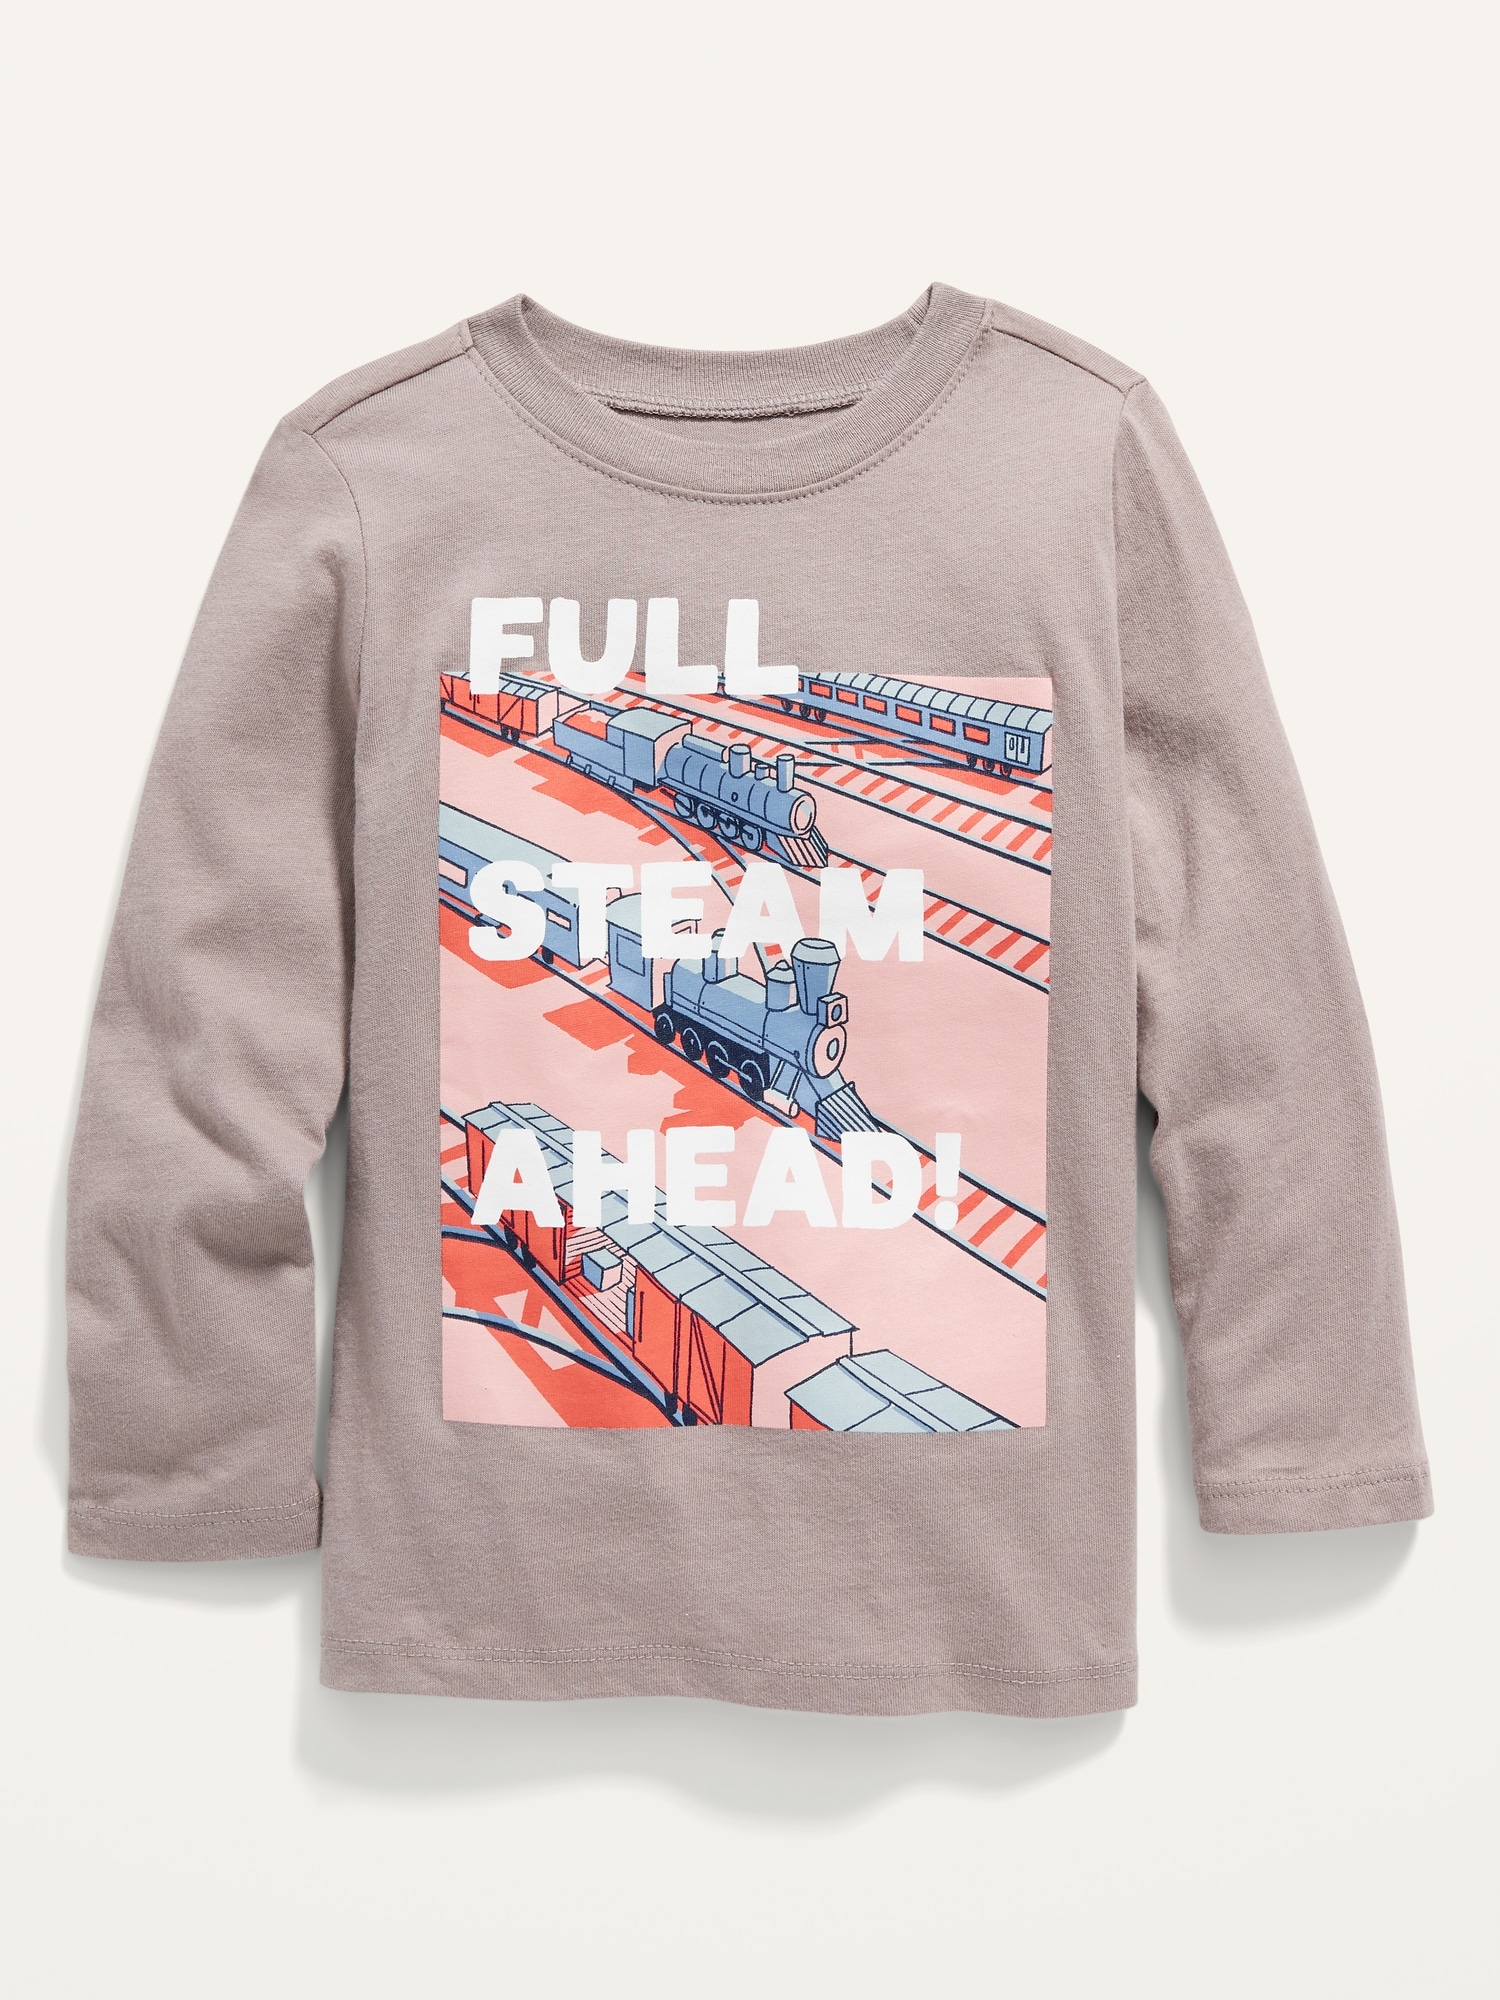 Unisex Long-Sleeve Graphic Tee for Toddler 